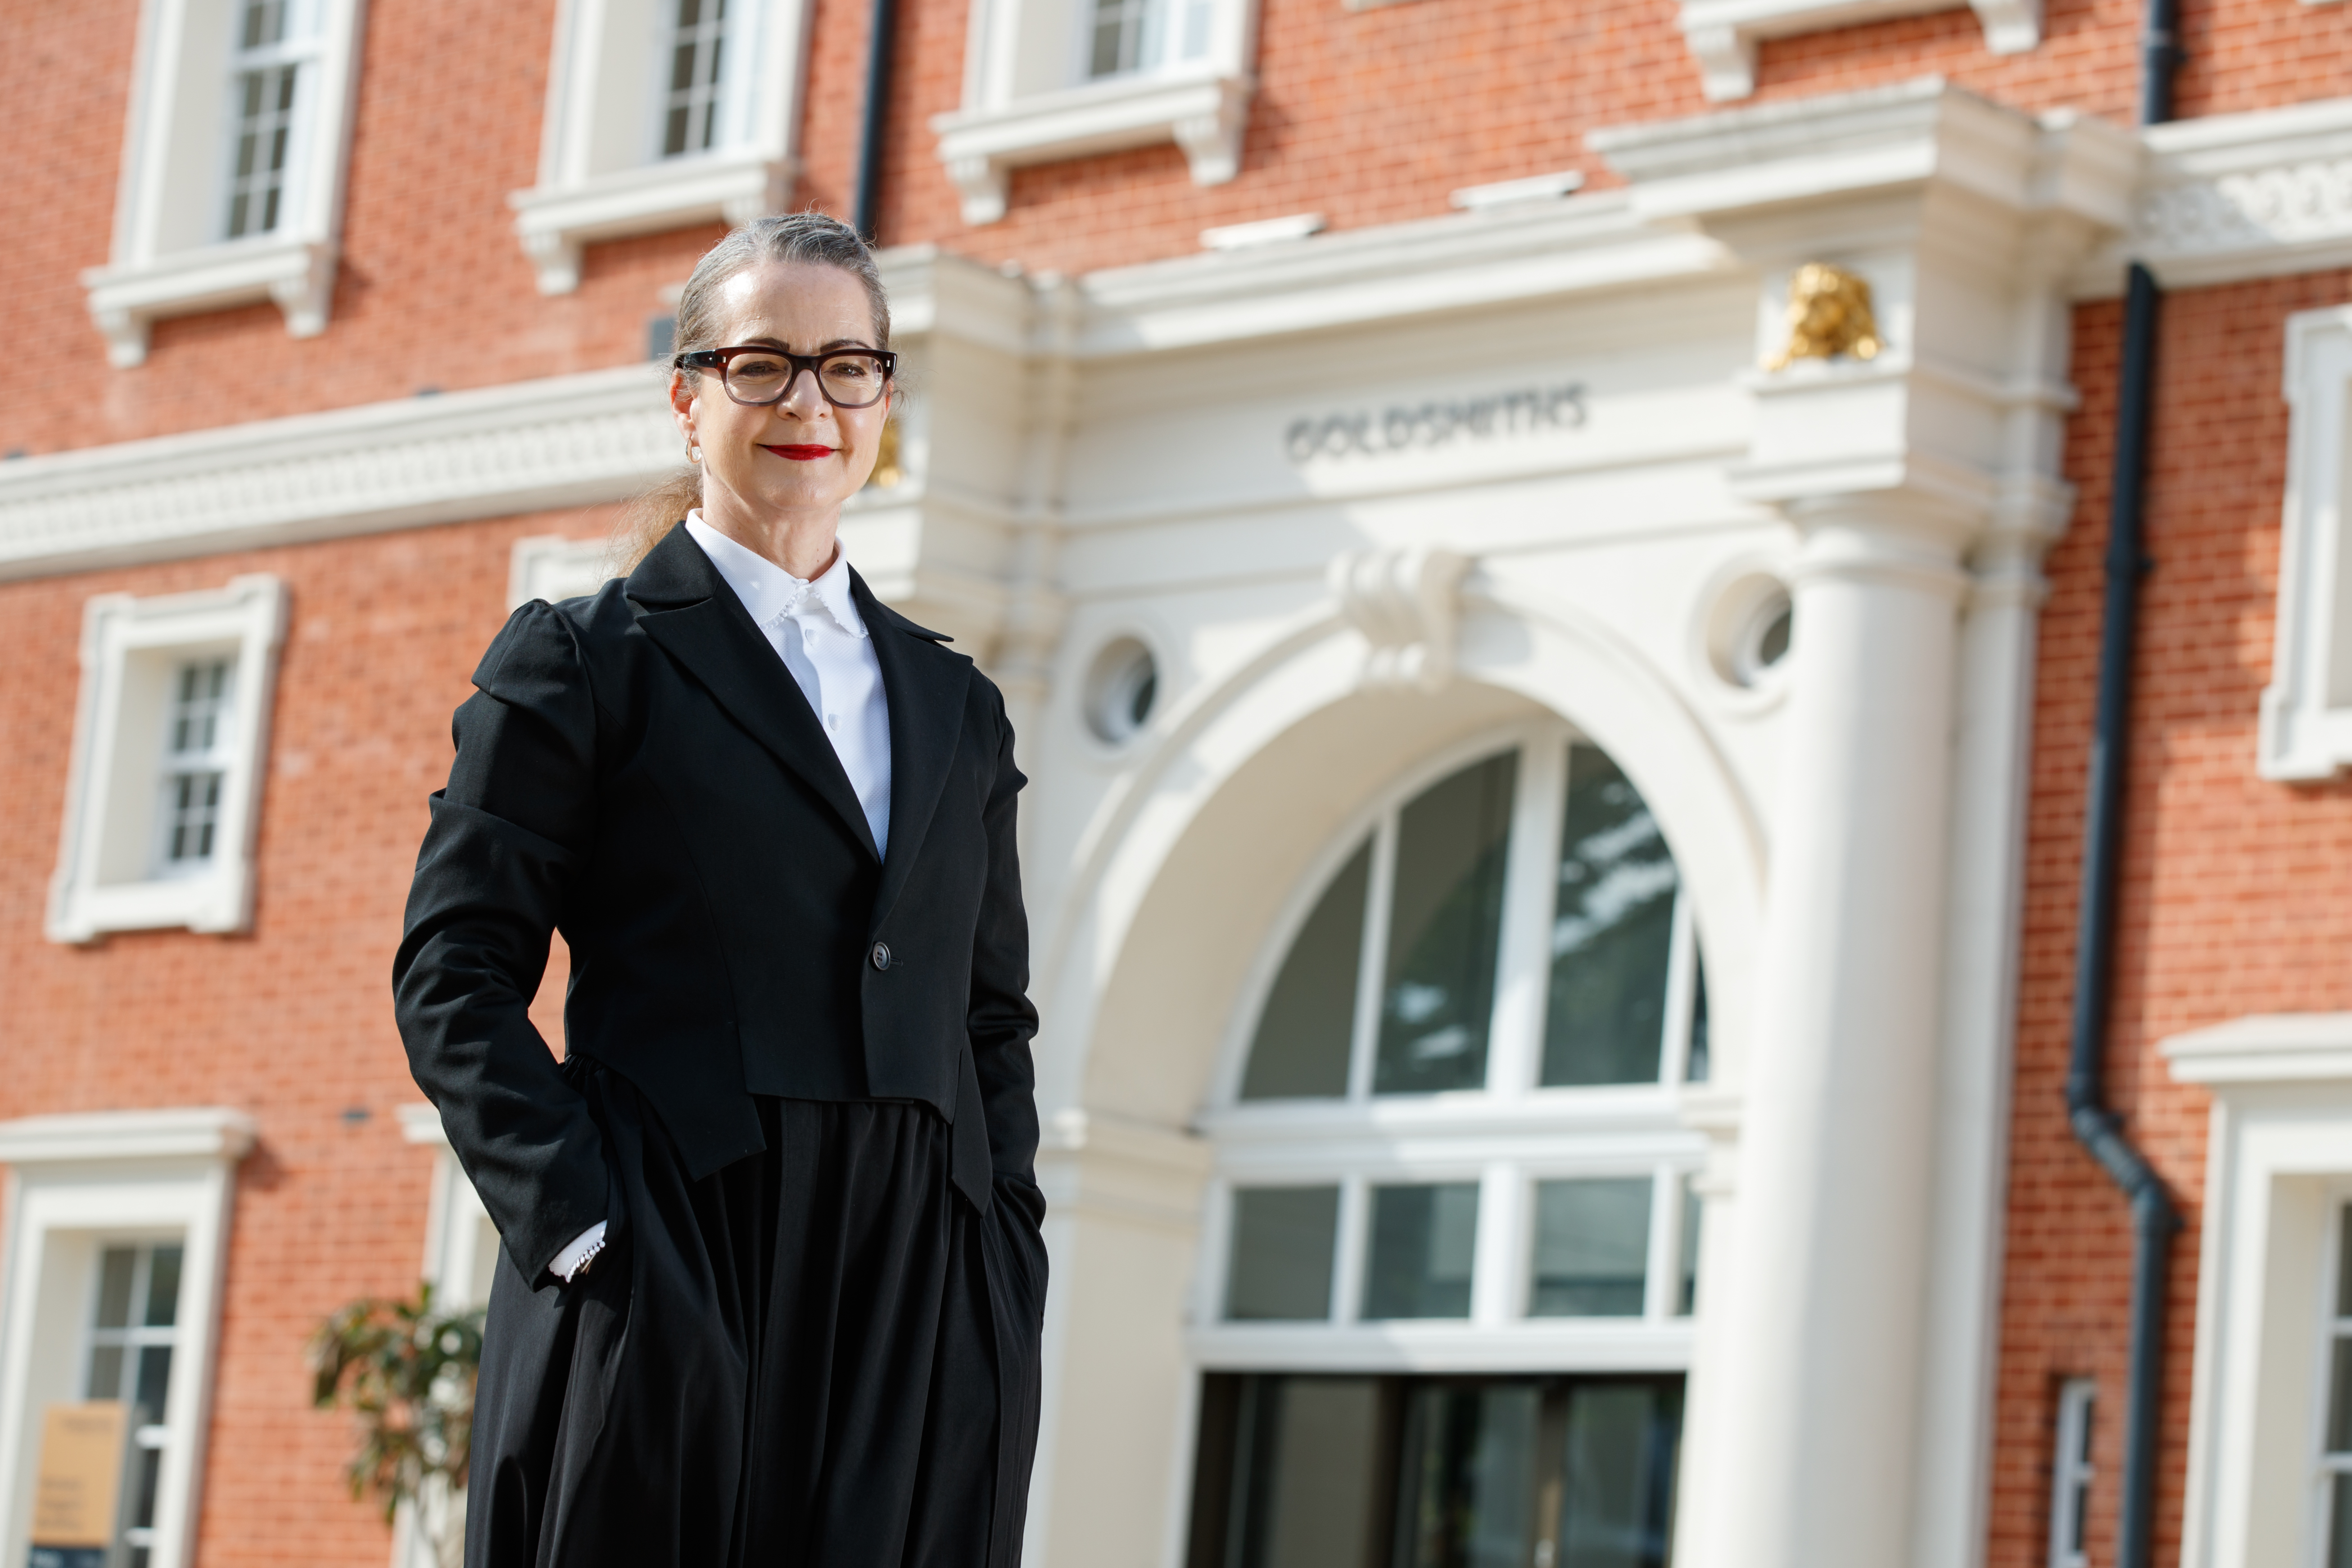 Professor Frances Corner, new Warden of Goldsmiths said the College's staff and students 